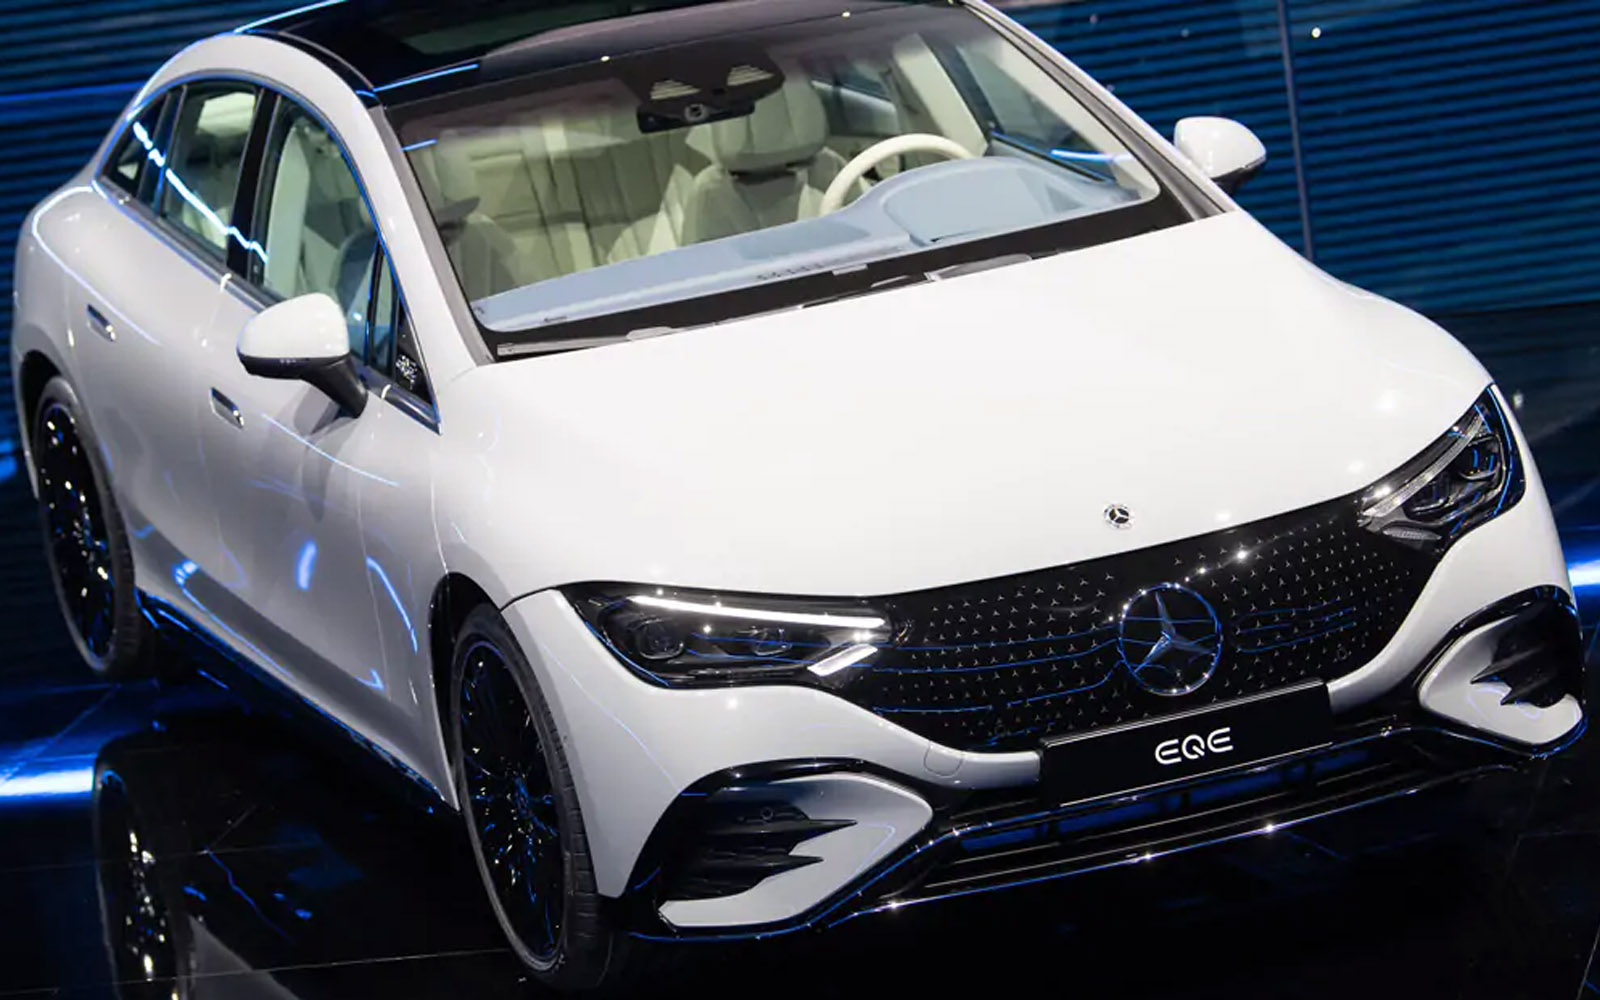 Mercedes-Benz Consolidates Its Global Marketing Entirely With Omnicom Group